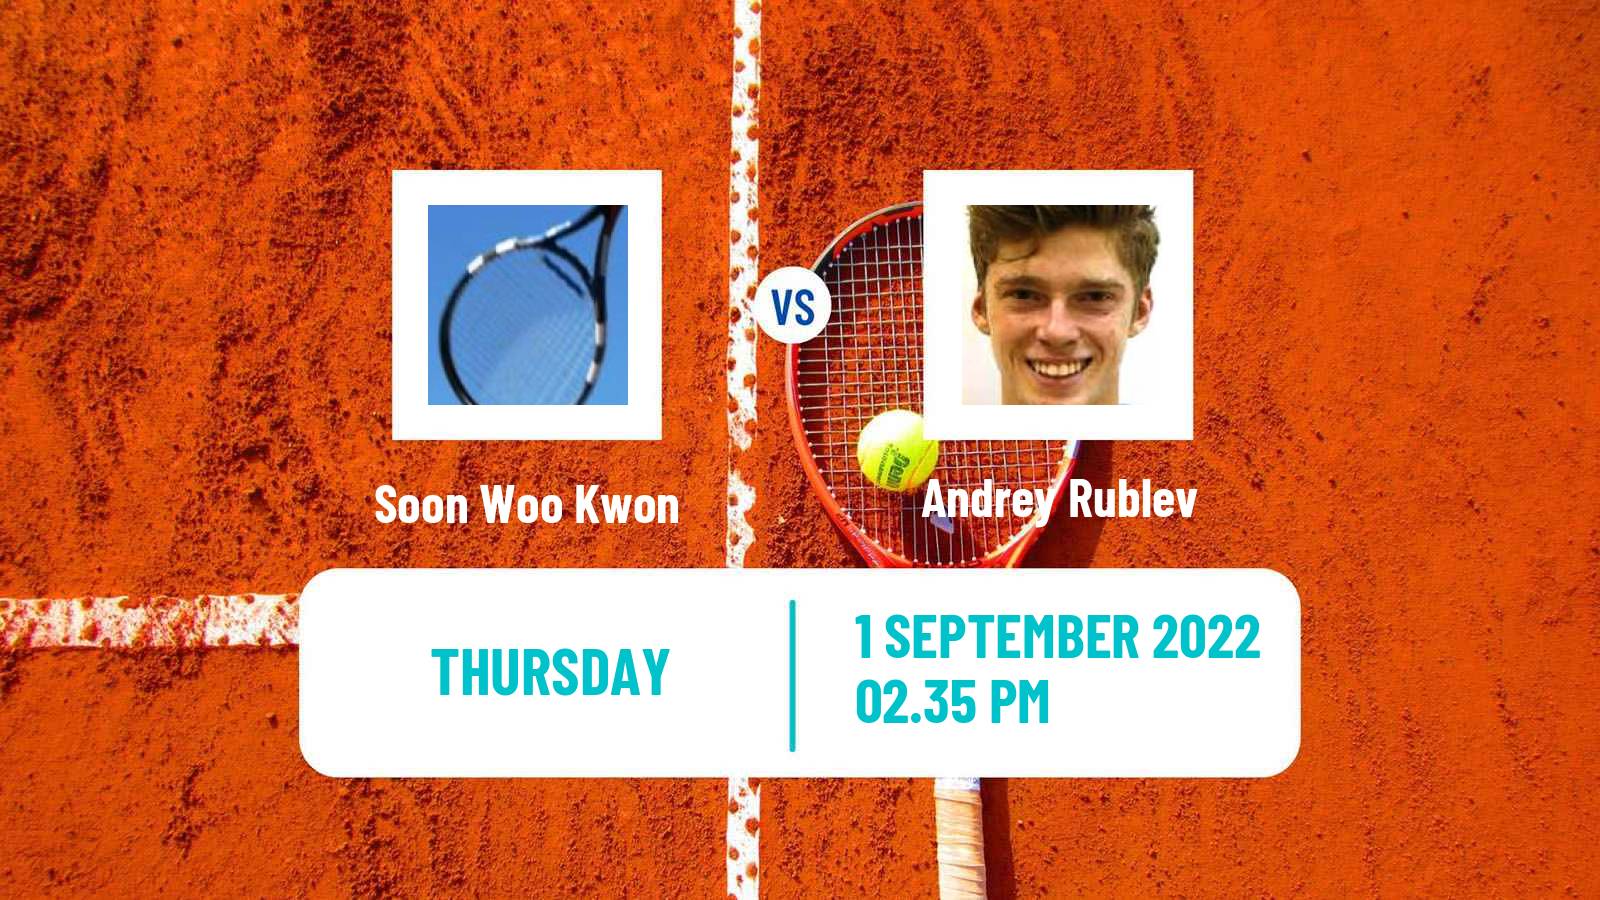 Tennis ATP US Open Soon Woo Kwon - Andrey Rublev